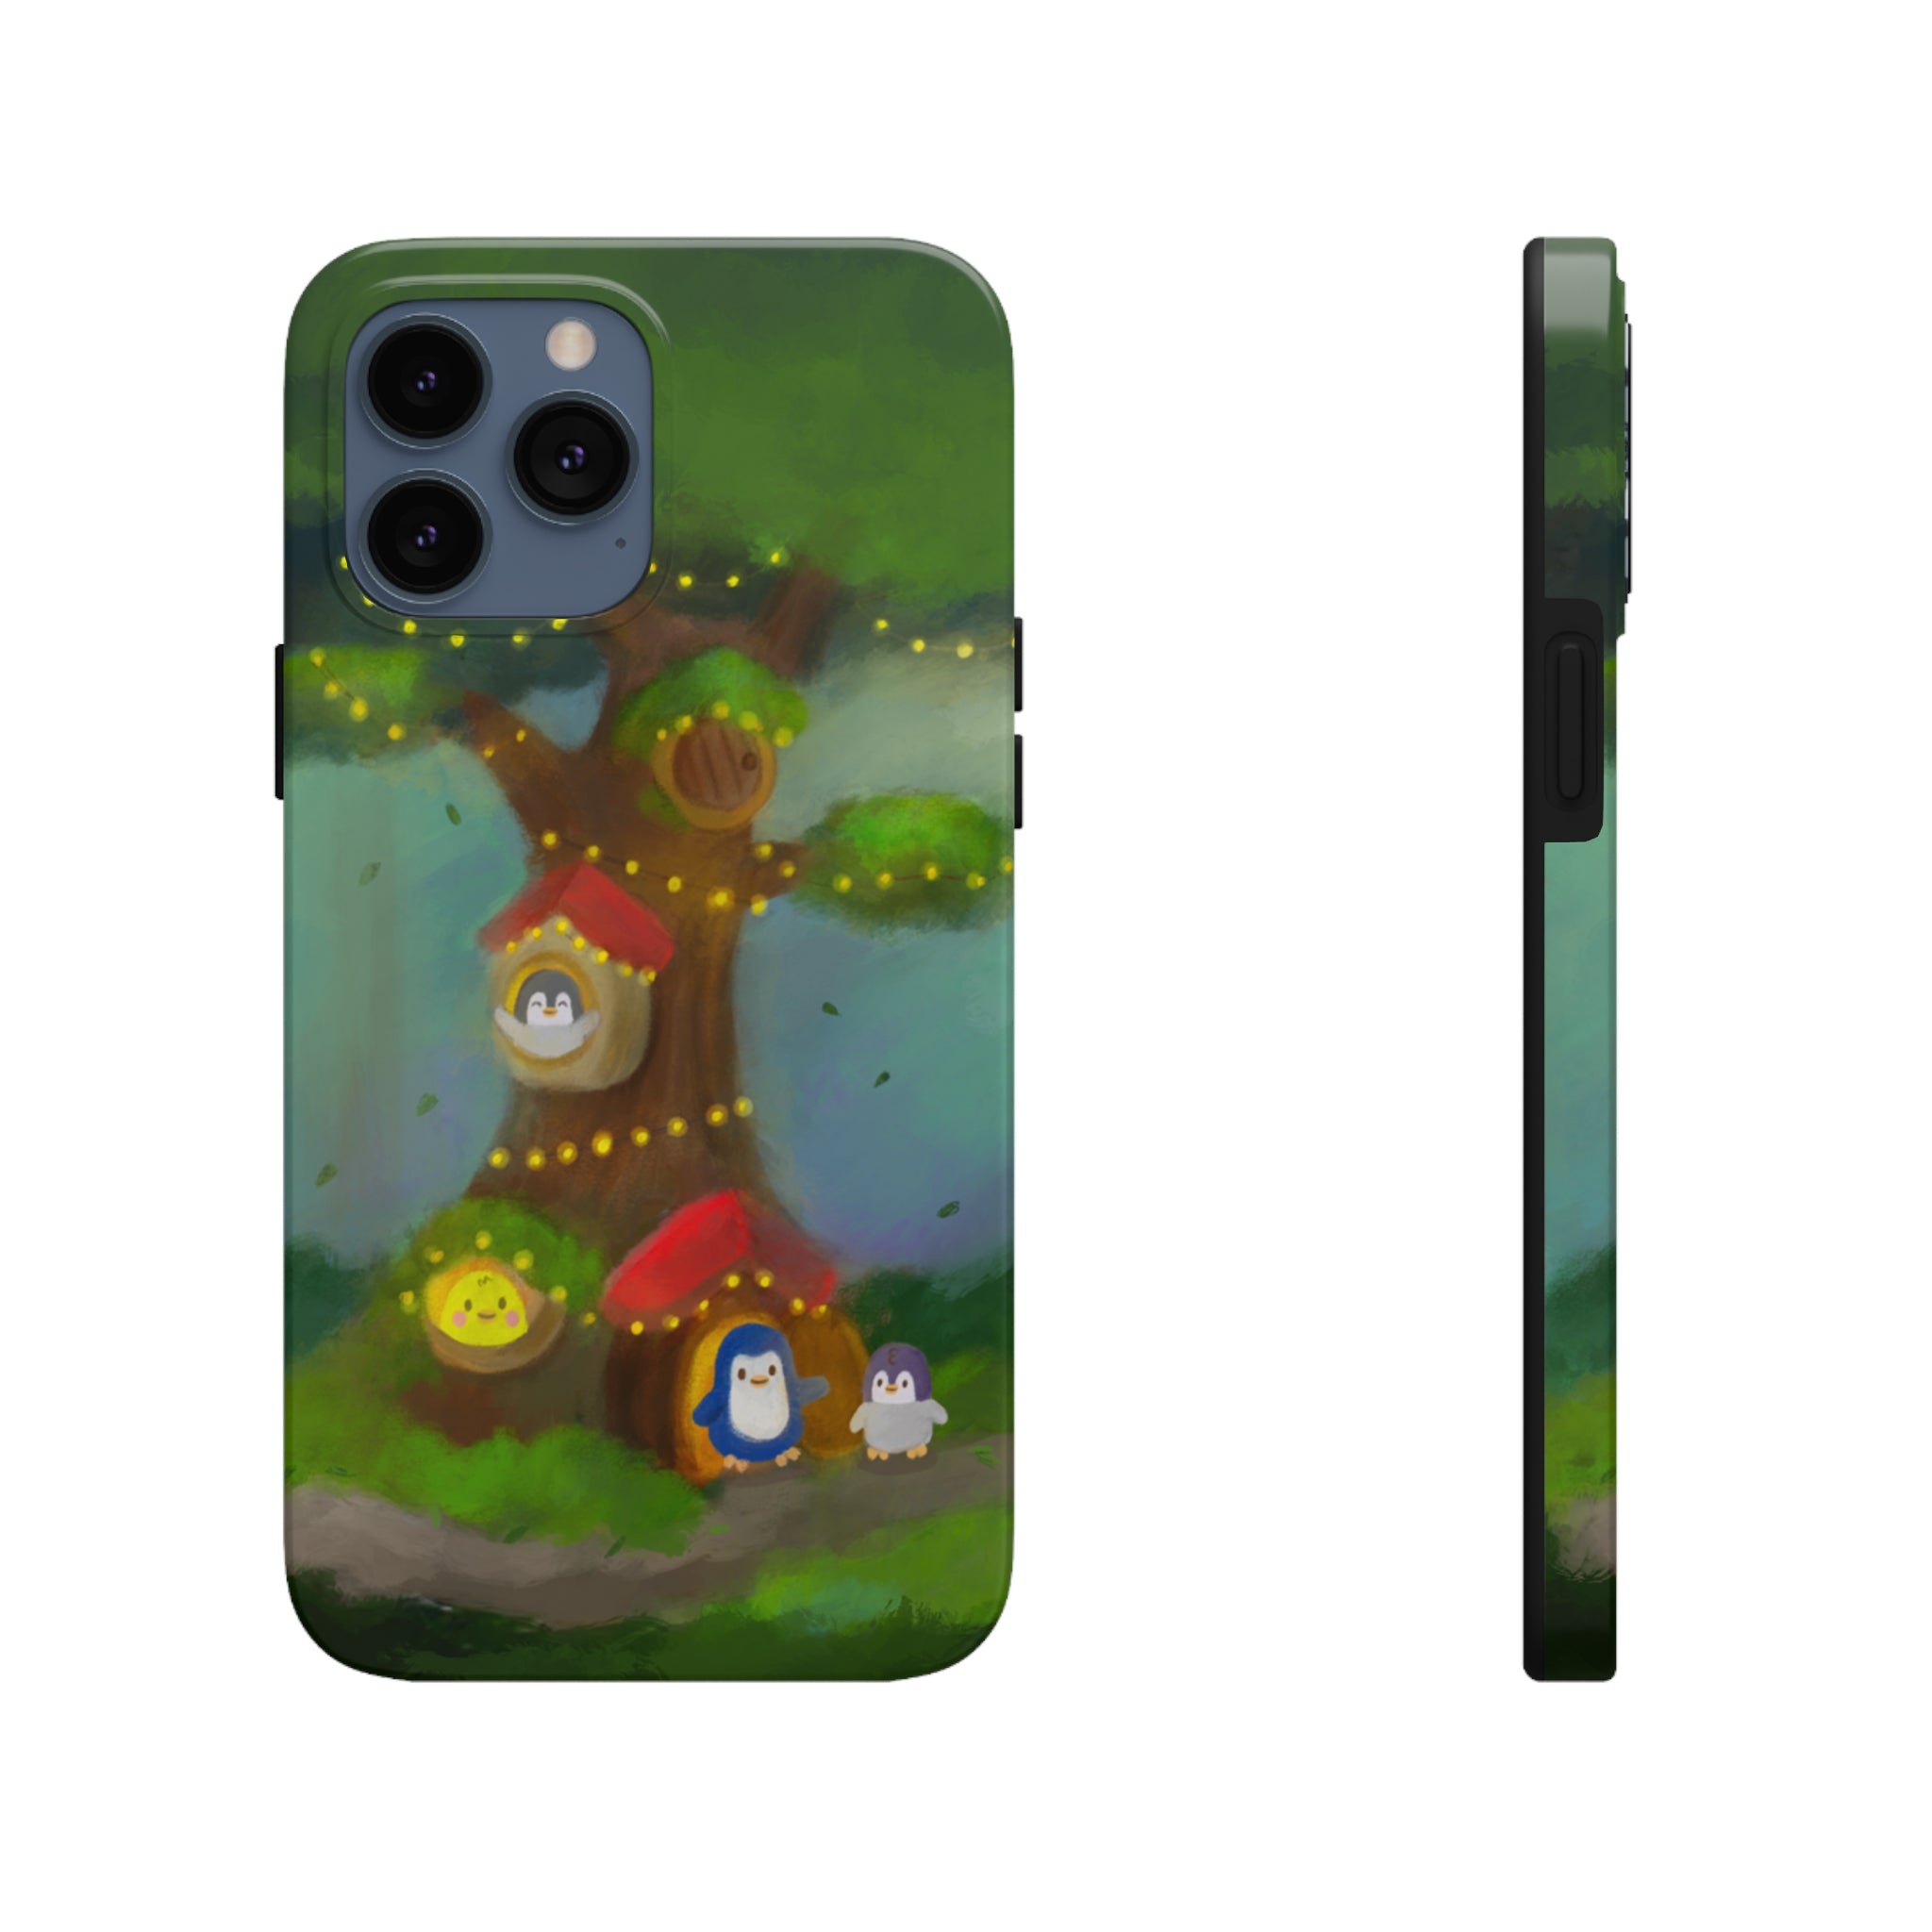 Our Home in the Forest iPhone Case